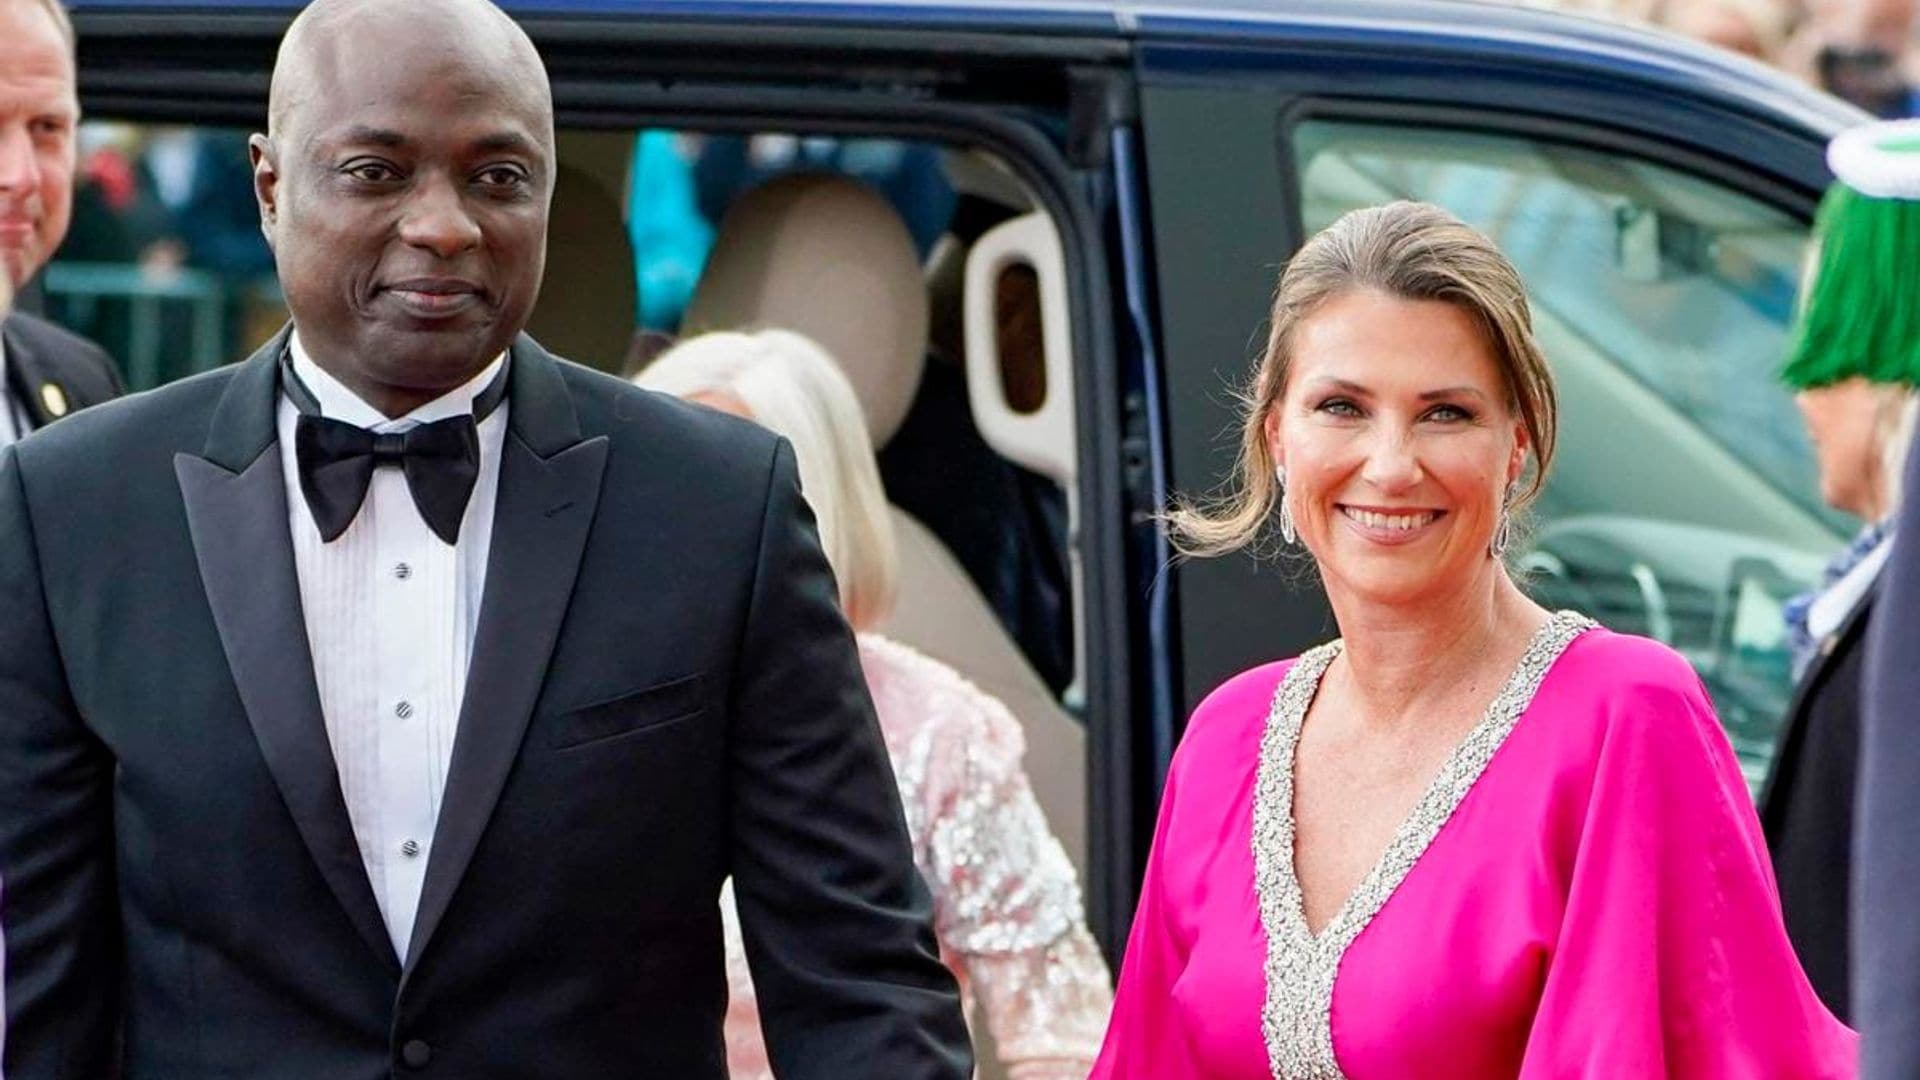 See how Princess Märtha Louise’s fiancé reacted to her summer pictures